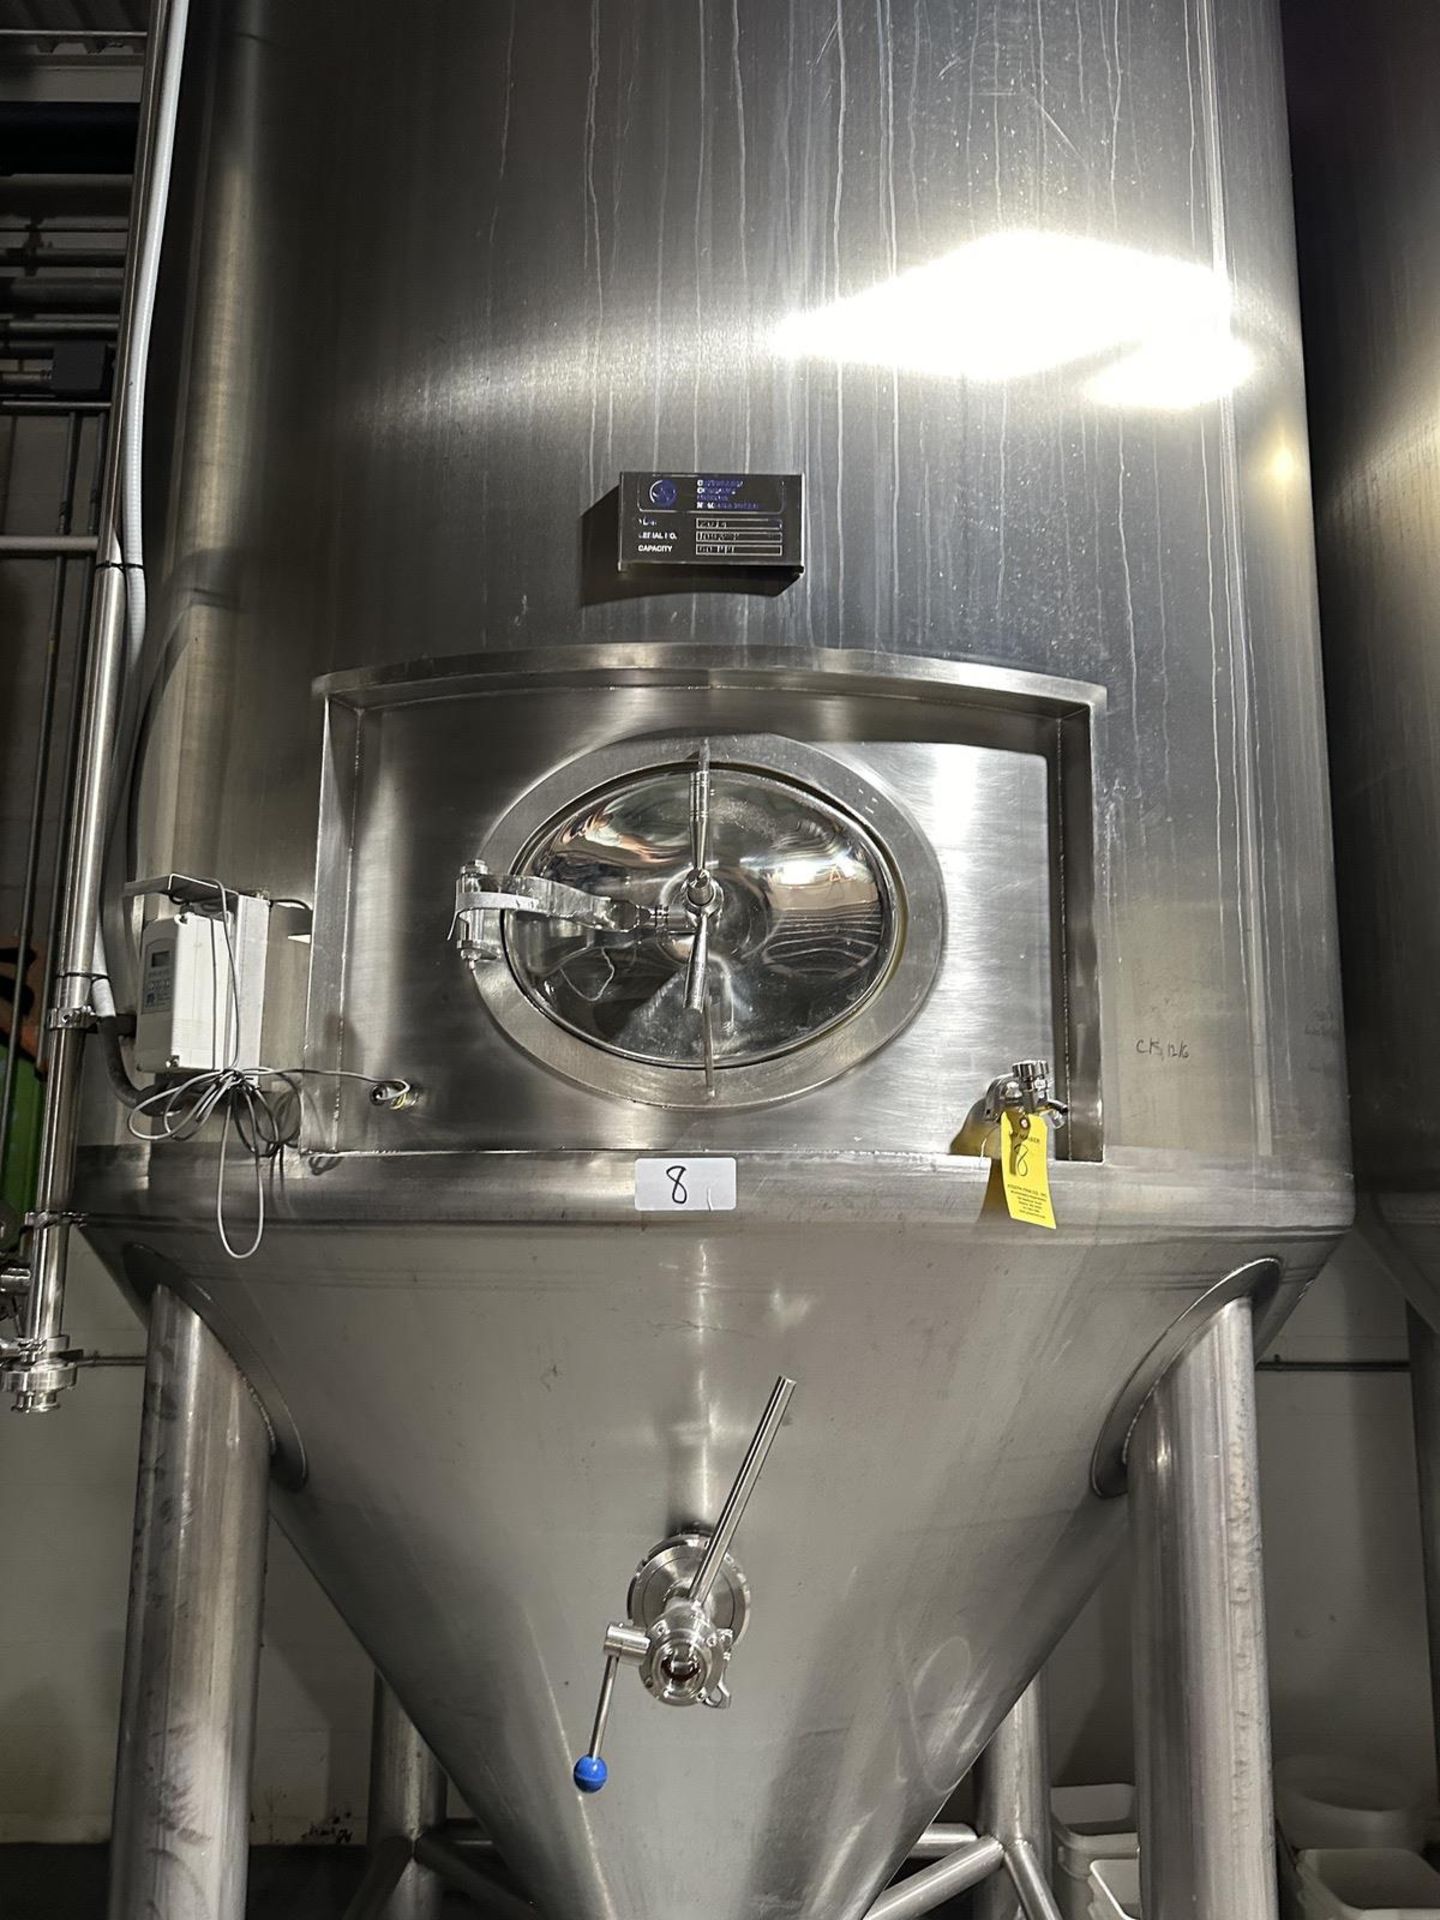 Criveller 60 BBL Stainless Steel Fermenter, Glycol Jacketed, s/n 1093-2, Nema 4X El | Rig Fee $350 - Image 4 of 5